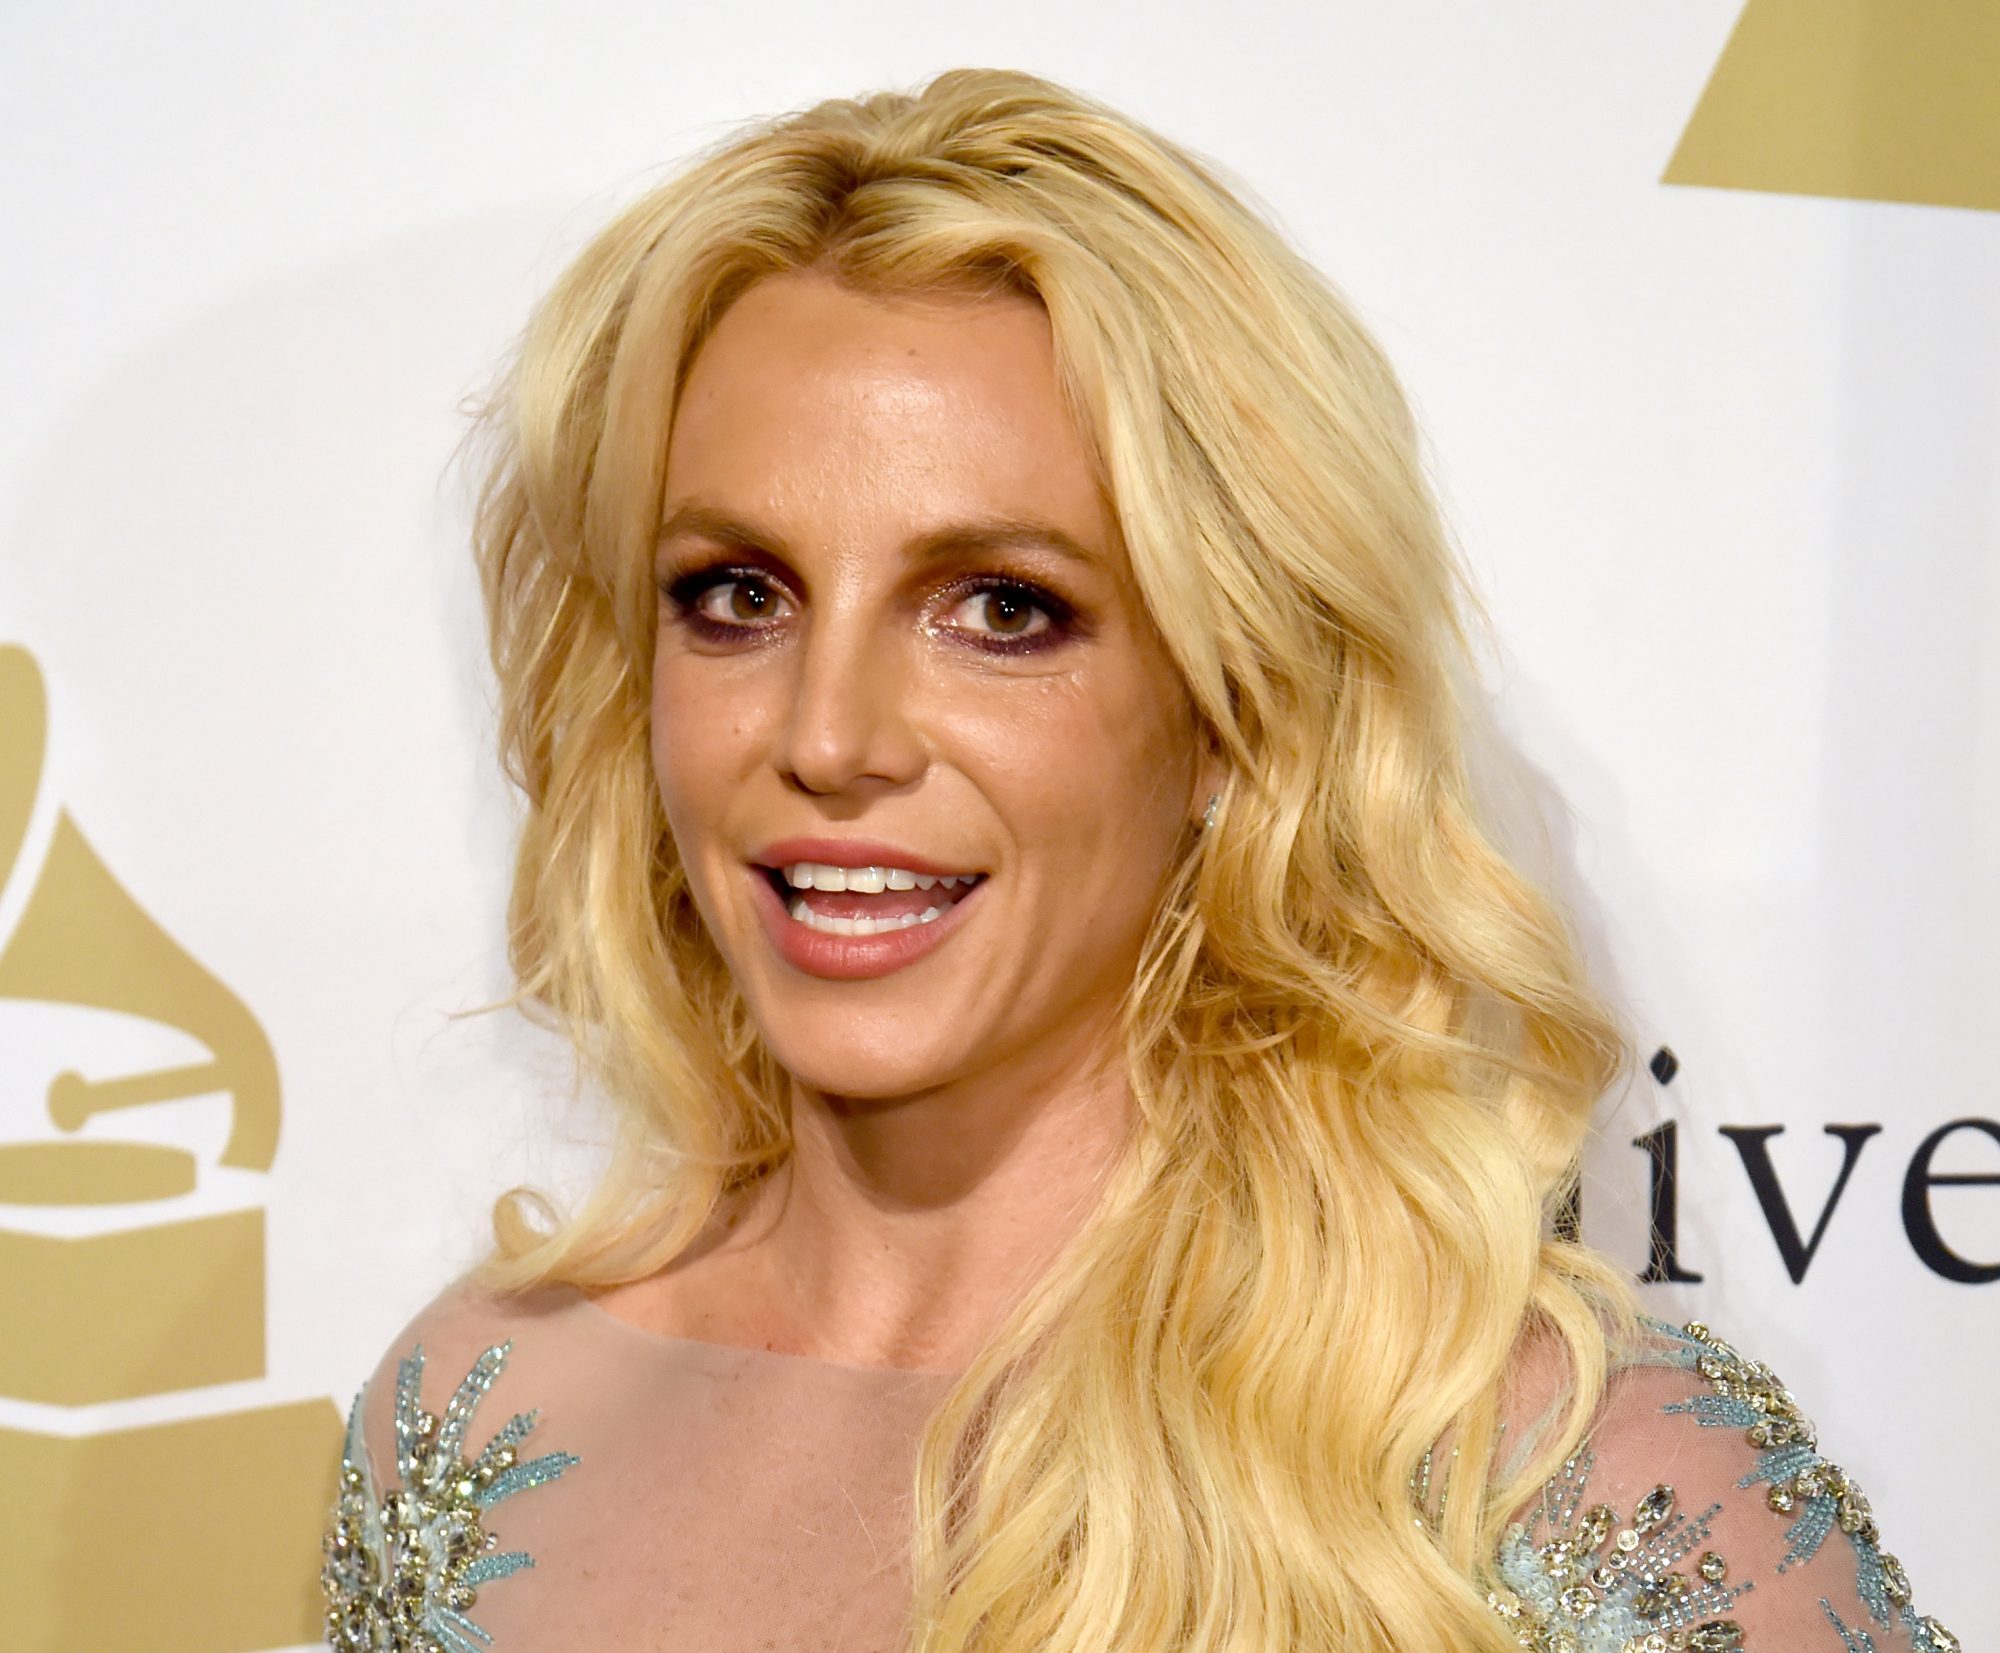 Britney Spears was almost attacked by a fan who rushed the stage ...